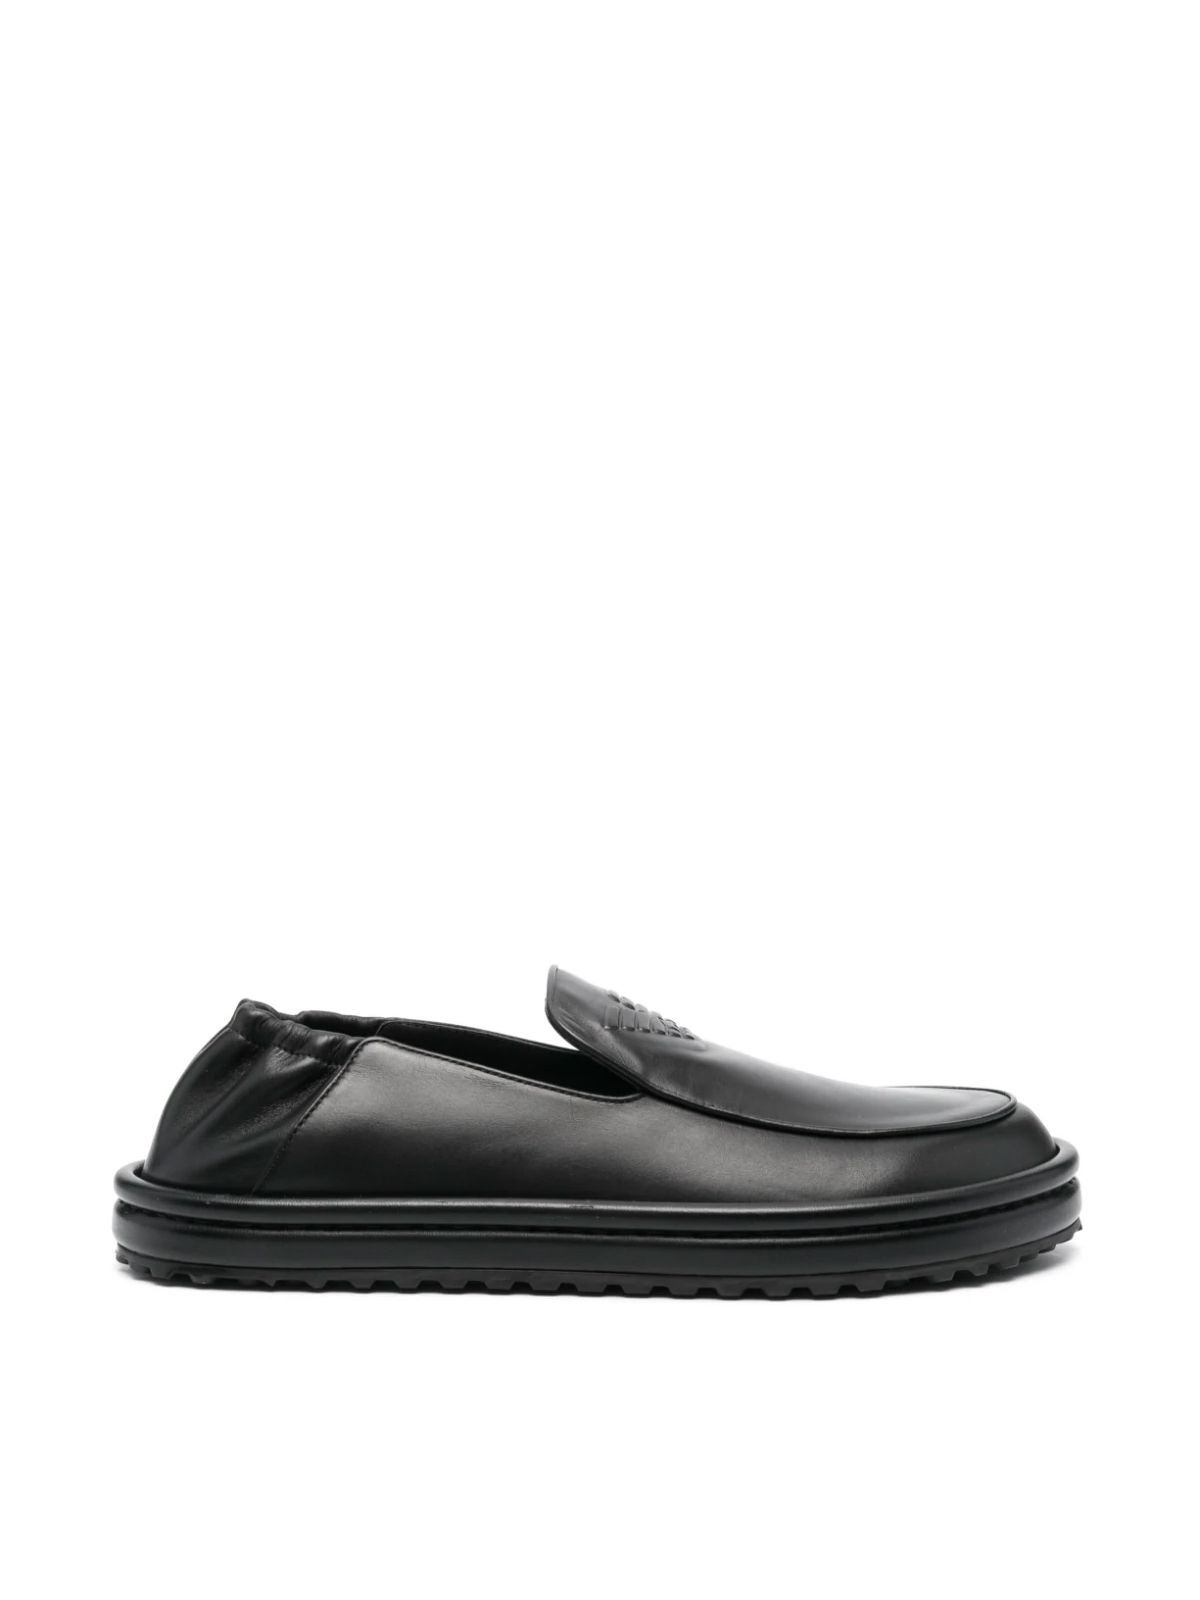 EMPORIO ARMANI MENS MOCCASINS: LEATHER LOAFERS,X4J109.XF668